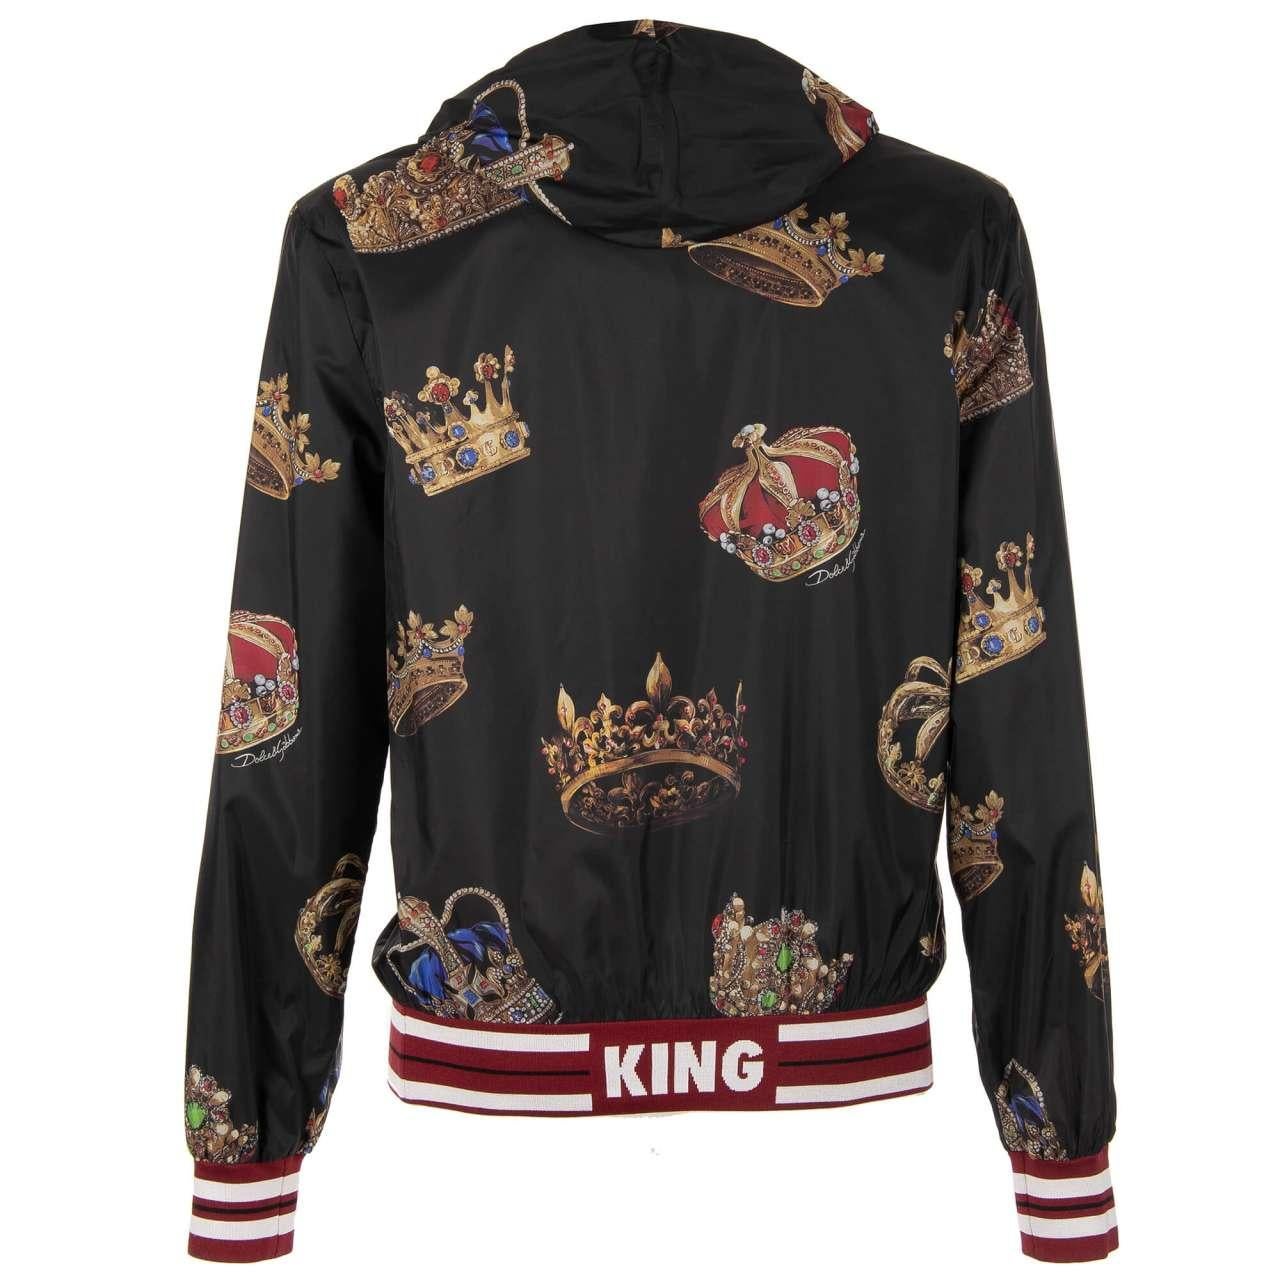 Dolce & Gabbana Crown Printed Bomber Jacket with Hoody and Pockets Black 48 M For Sale 1